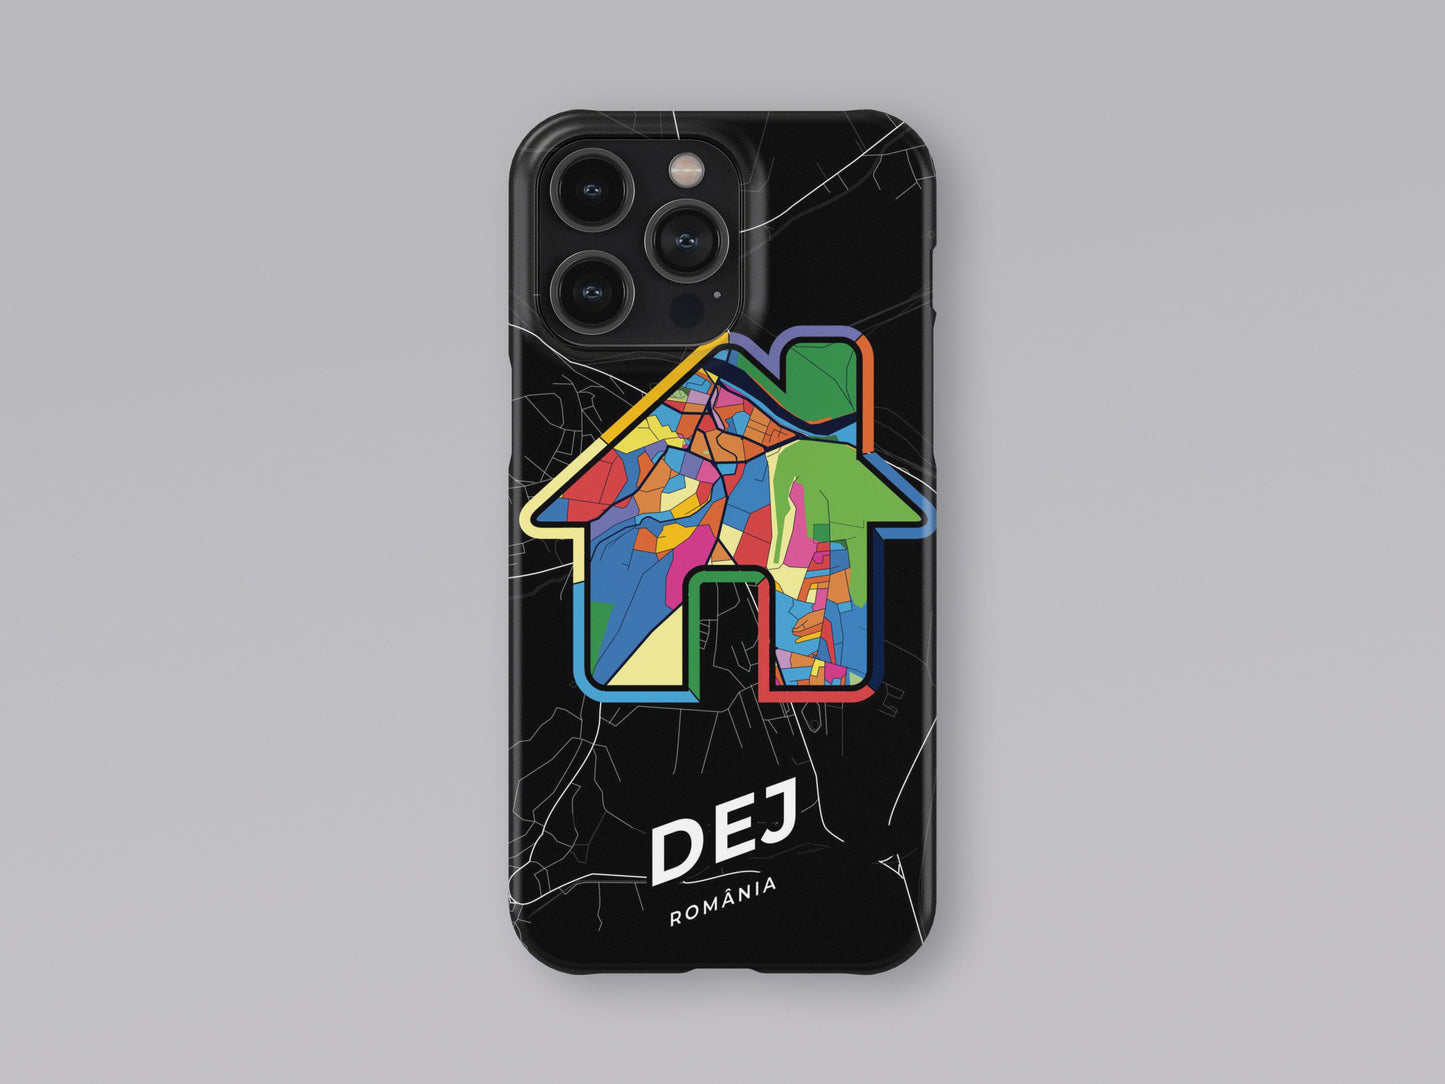 Dej Romania slim phone case with colorful icon. Birthday, wedding or housewarming gift. Couple match cases. 3